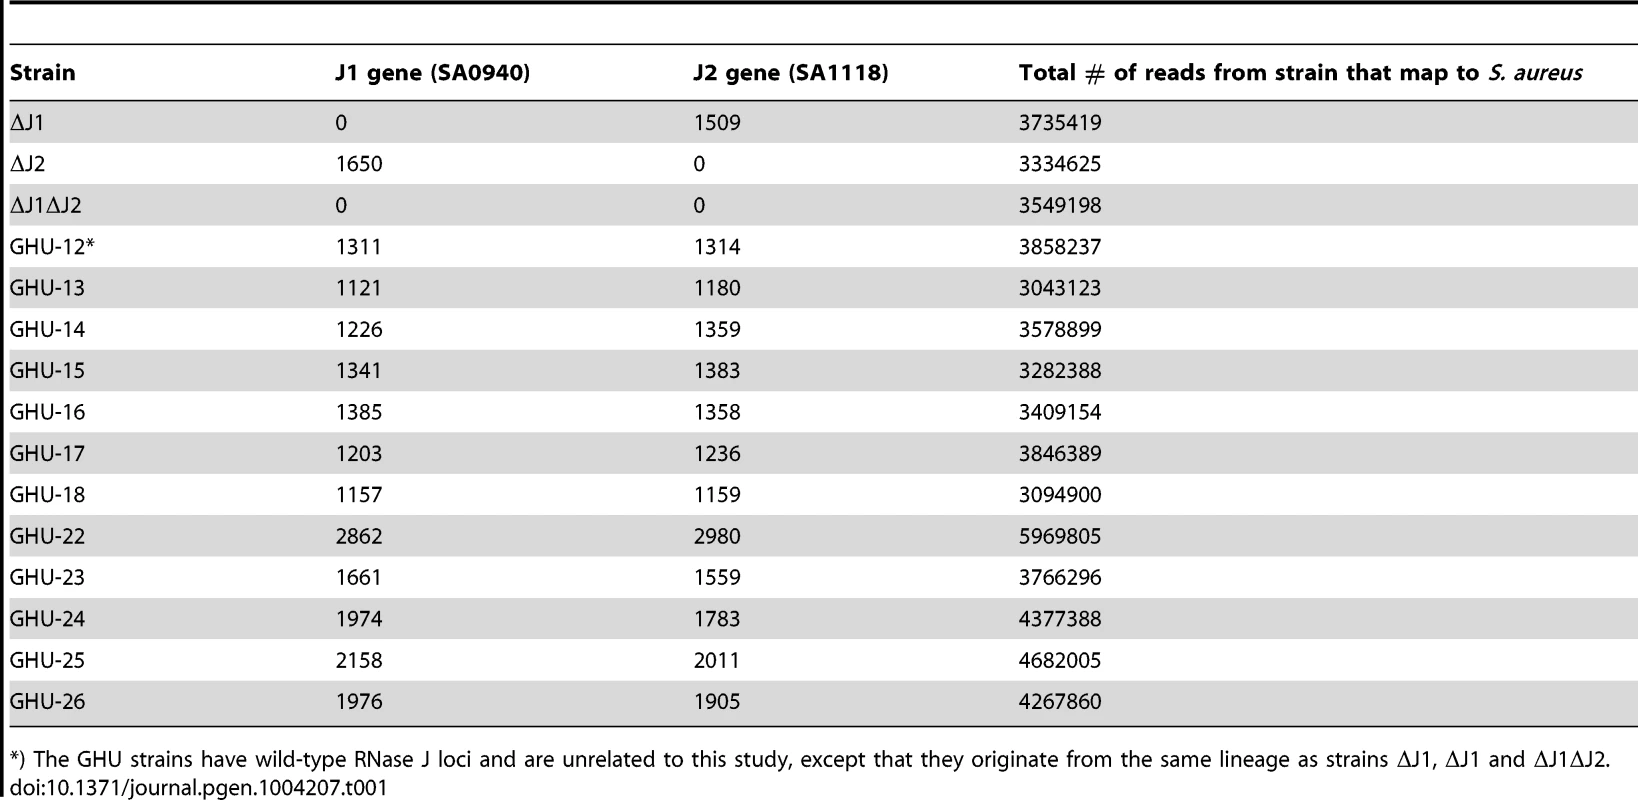 Reads mapping to the RNase J1 and RNase J2 genes in the RNase J deletion mutants and in unrelated strains (GHU-12 to 26).